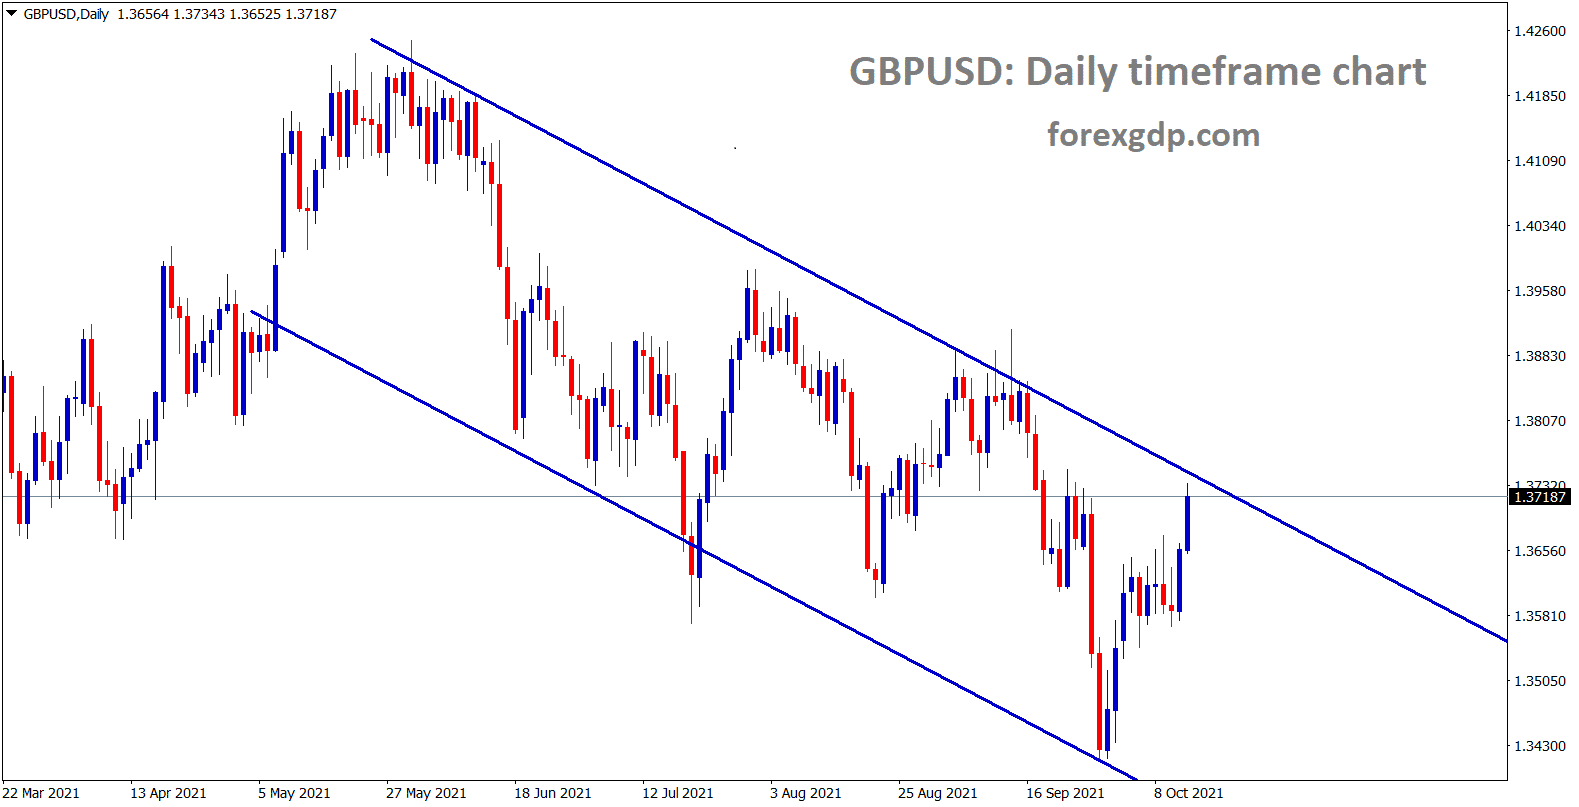 GBPUSD is moving in a downtrend line going to reach the top lower high of the downtrend